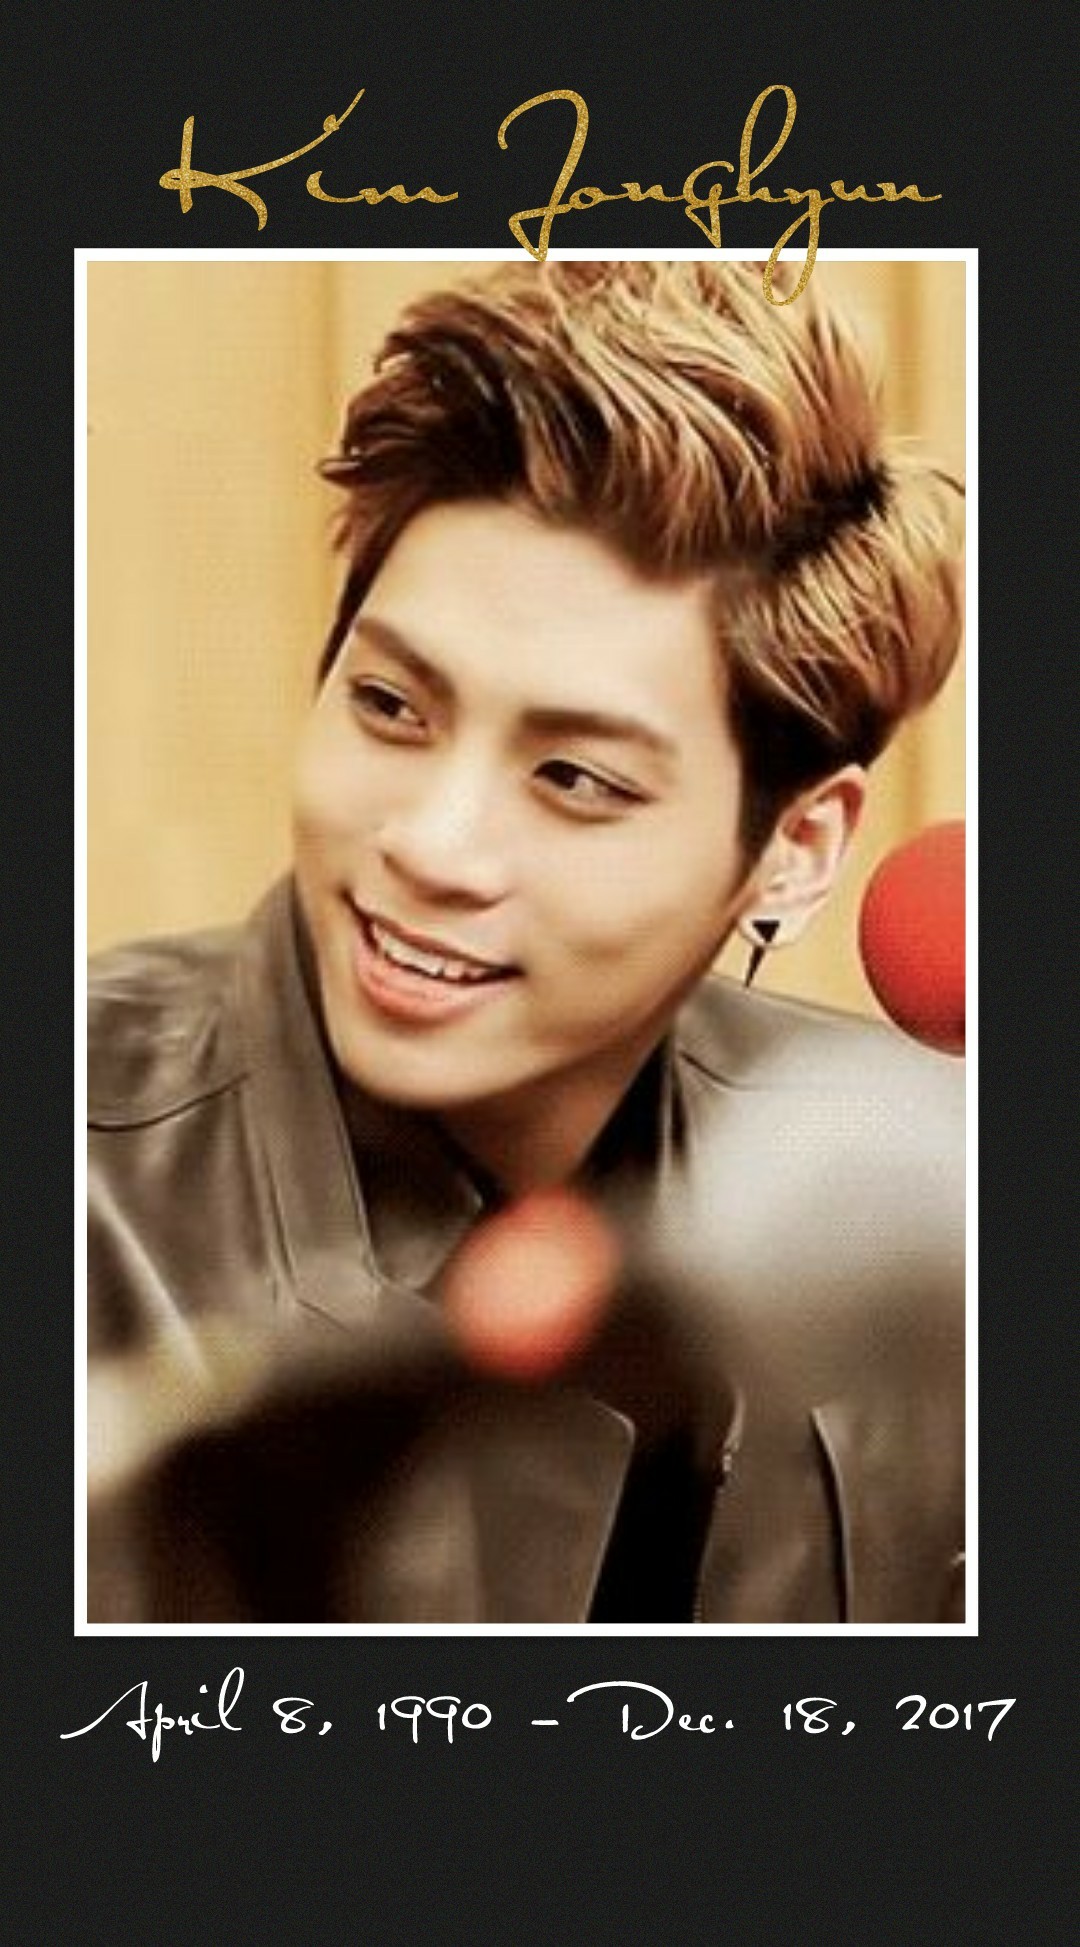 May you live on in our hearts and our memories. R.I.P. Kim Jonghyun